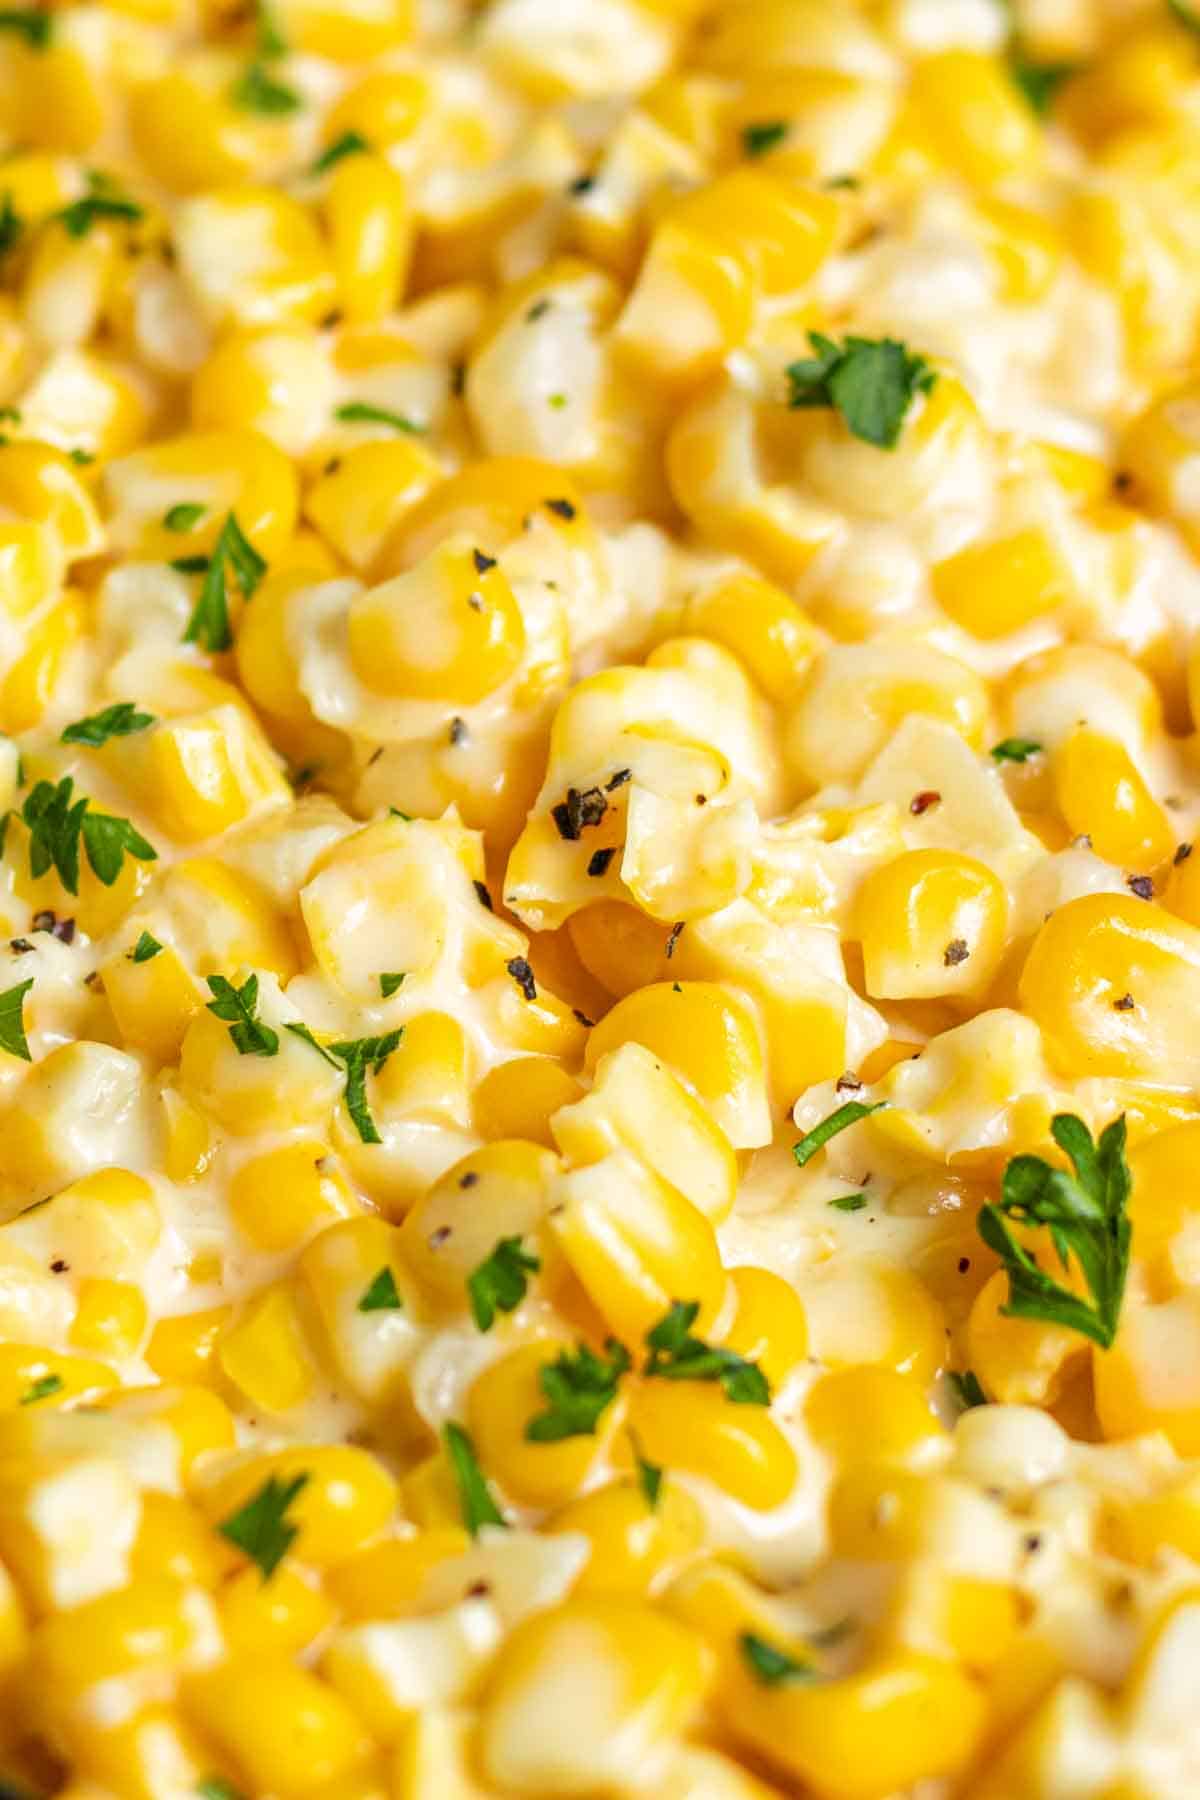 A close up of a dish with Creamed Corn